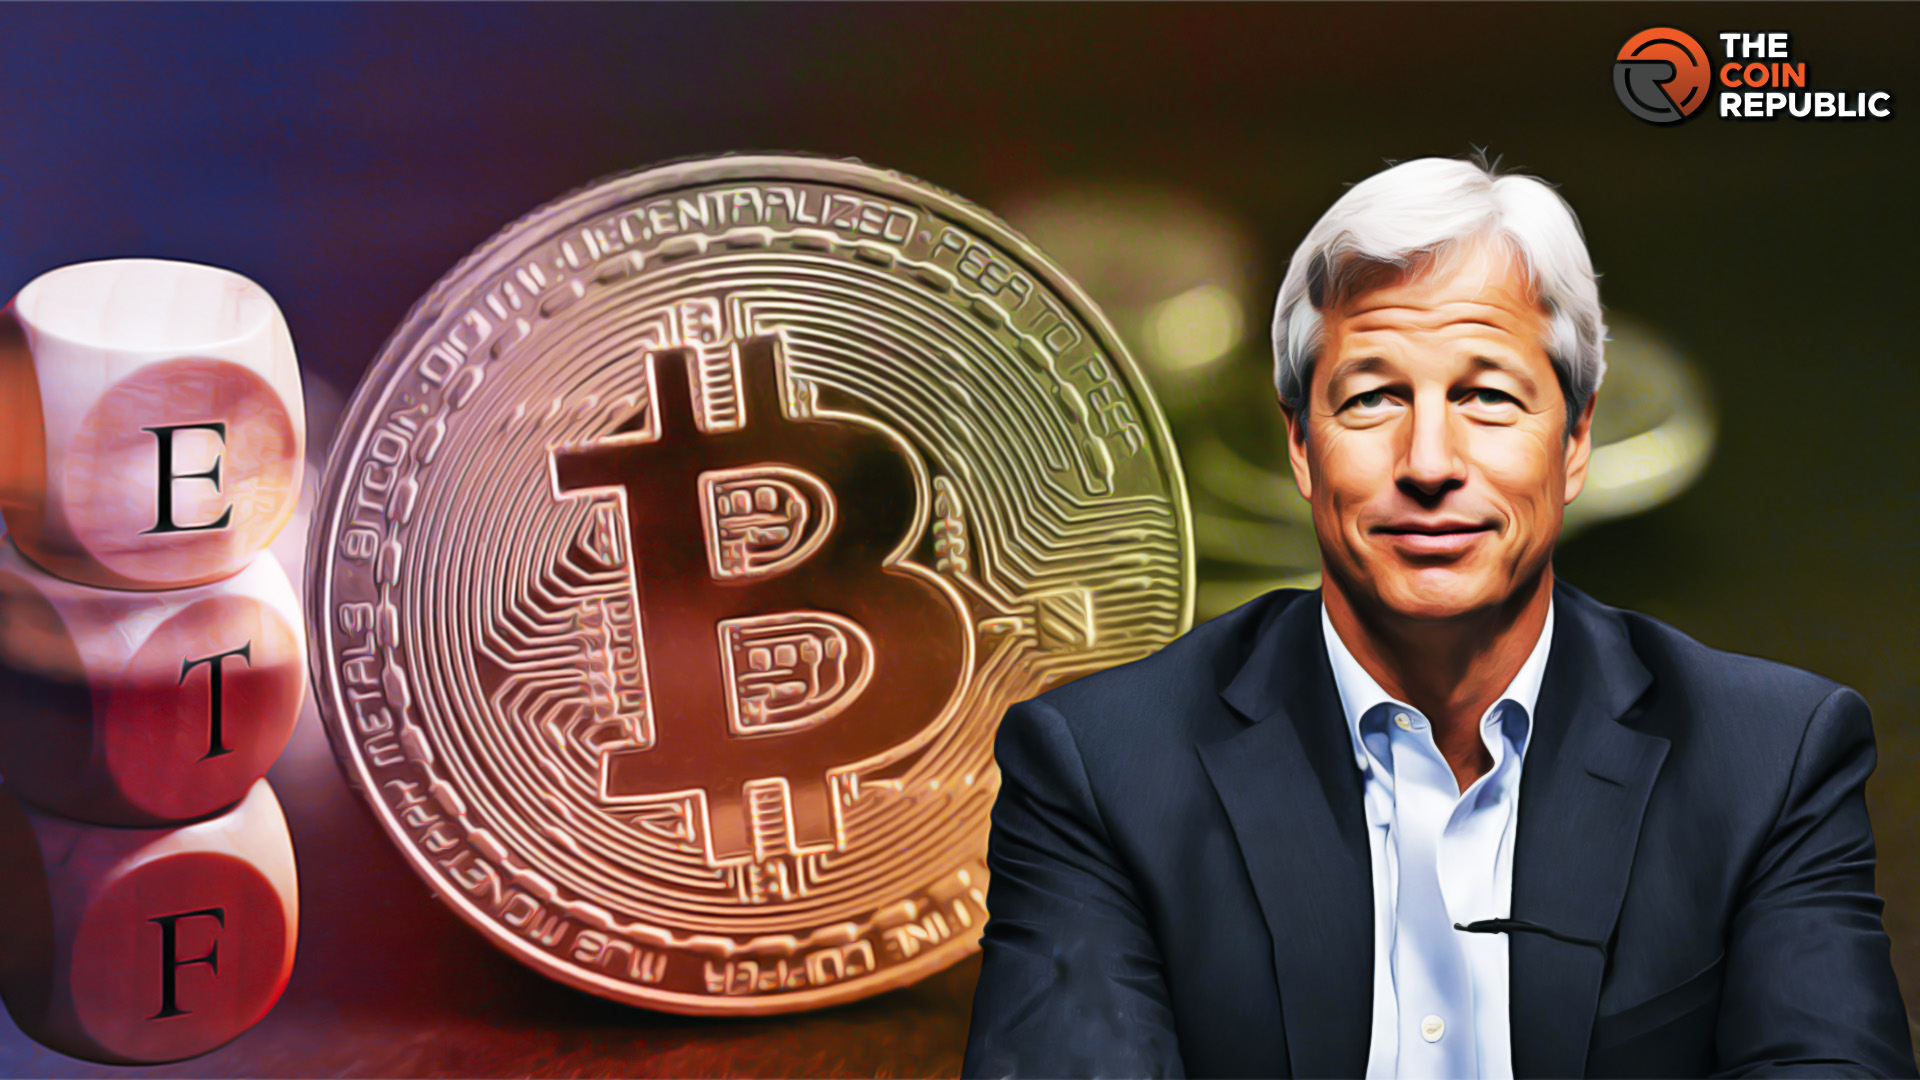 Chase CEO, Jamie Dimon Speaks About Bitcoin ETF and US Economy